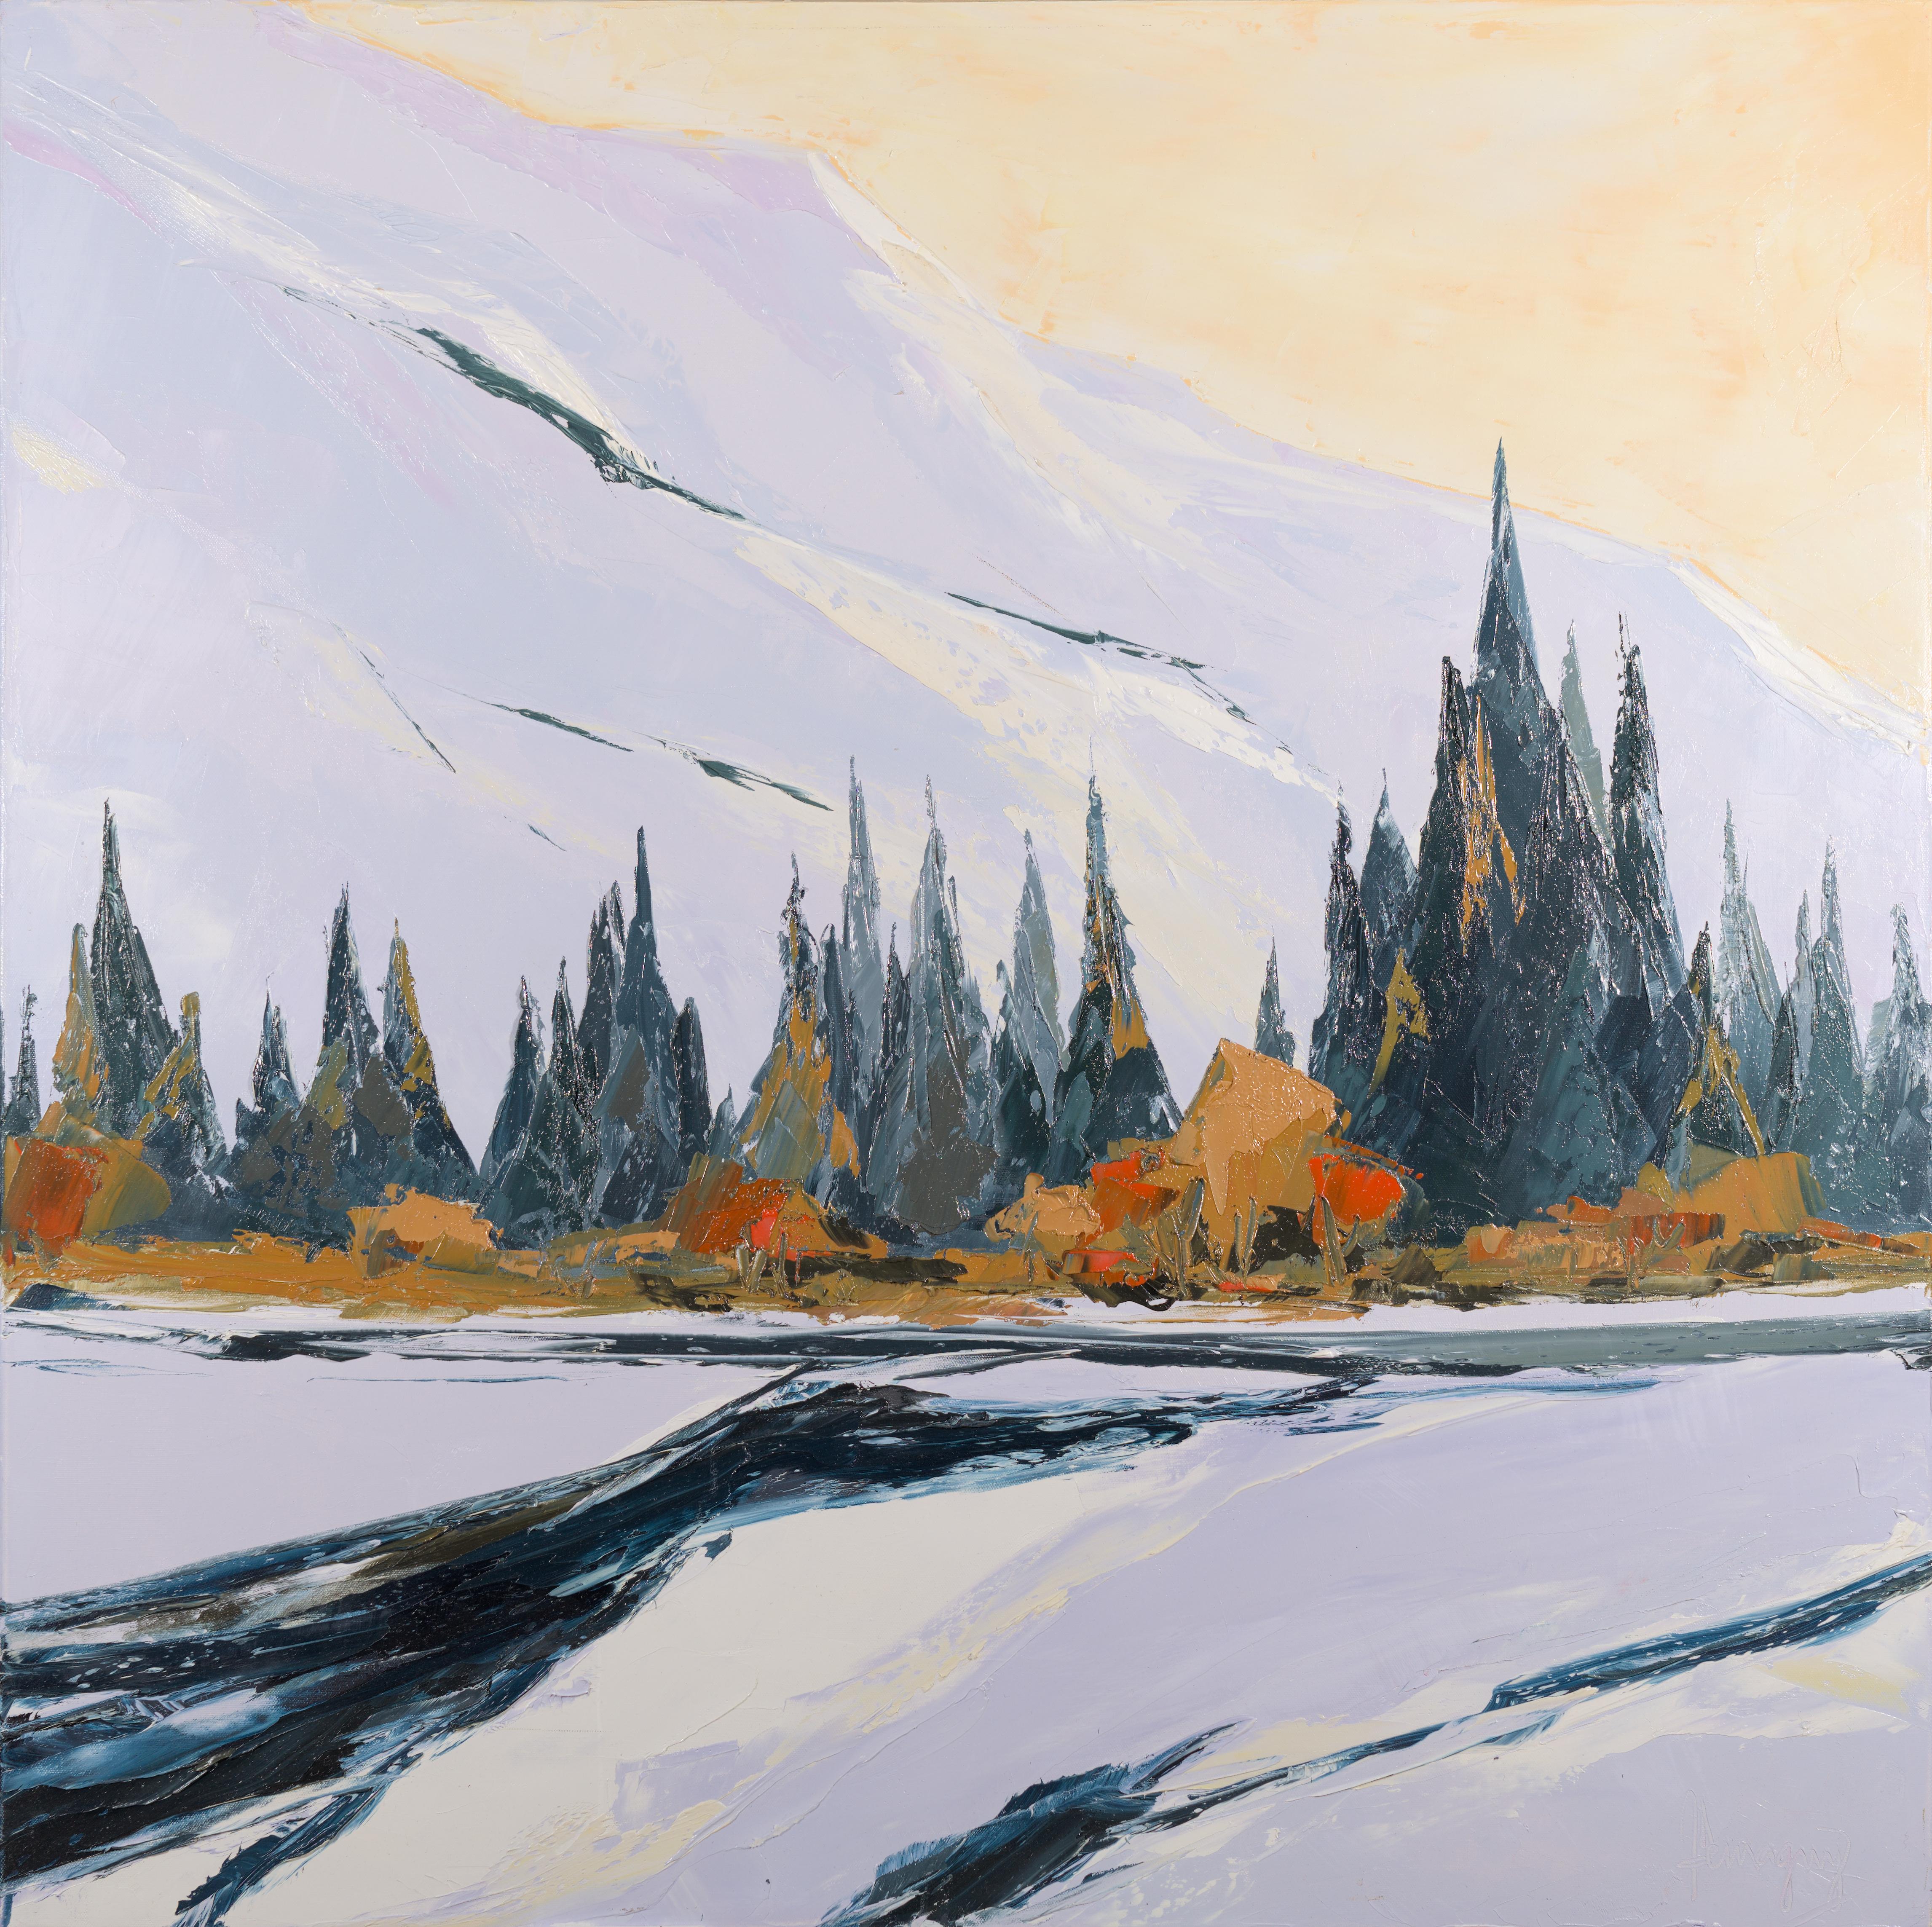 Marcel Demagny Still-Life Painting - "December", Snow-Covered Peaks Forest River in Winter Landscape Oil Painting